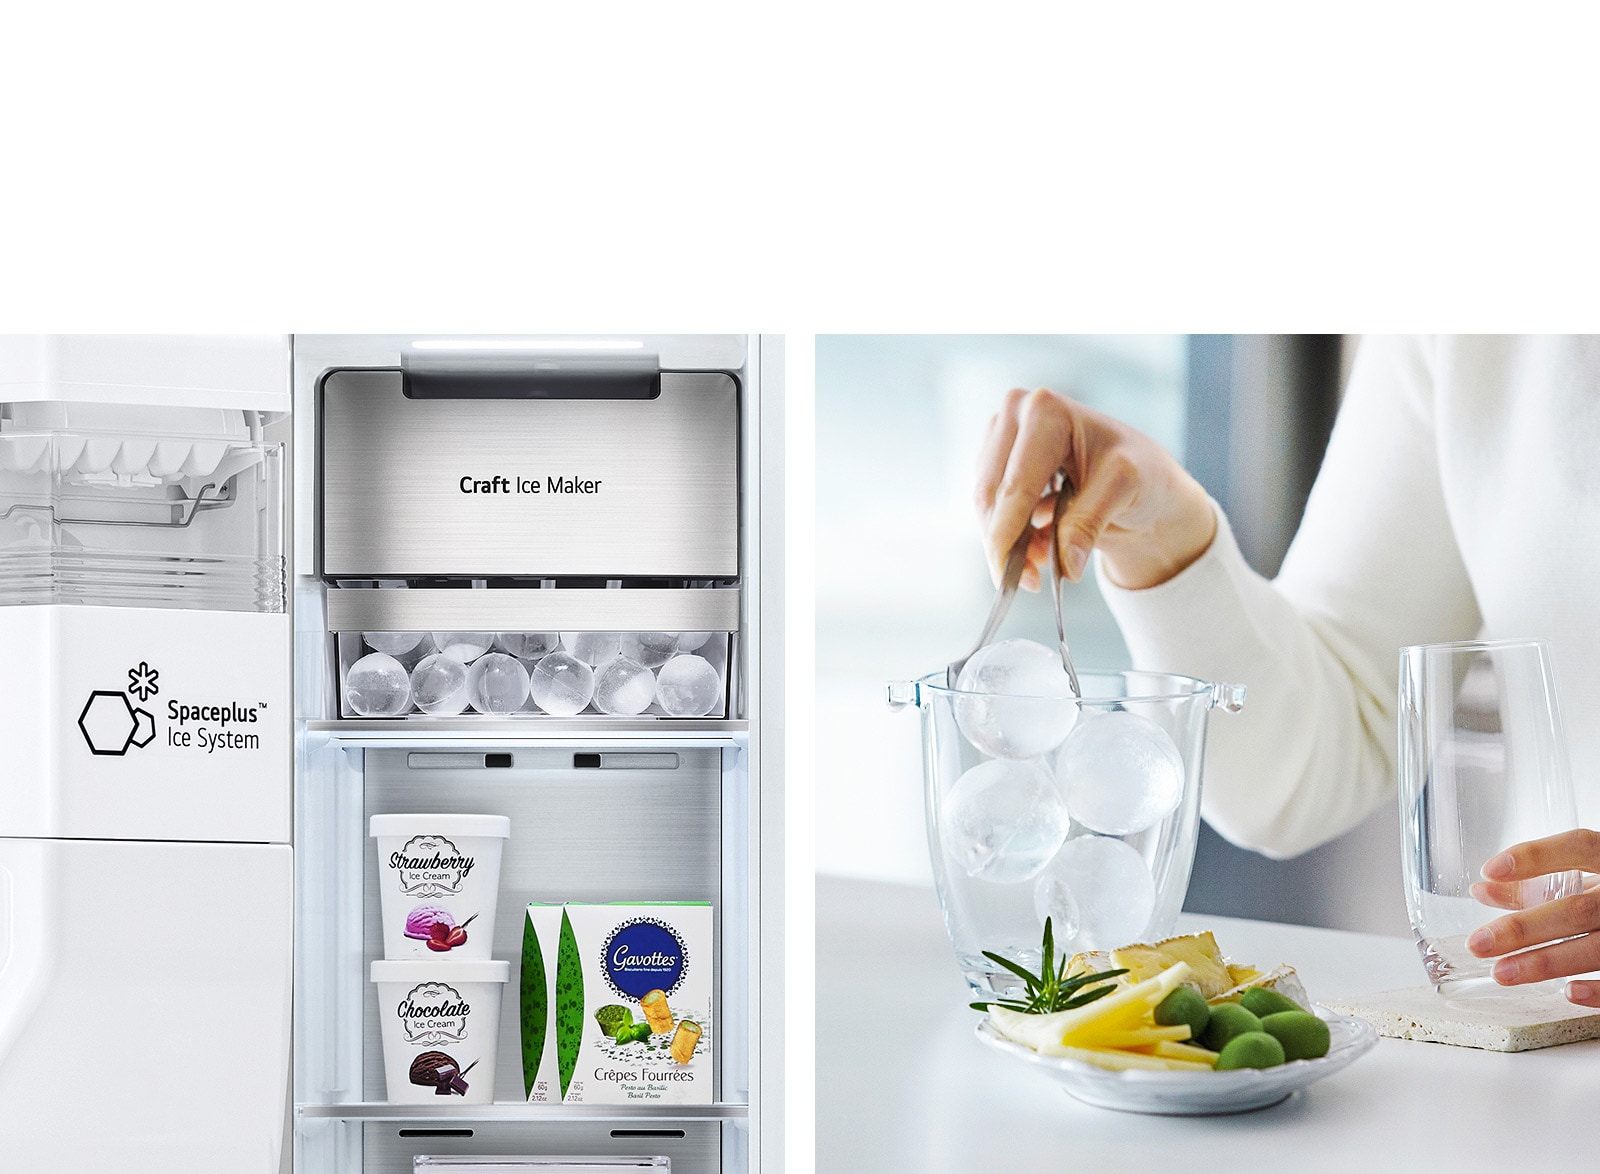 Two images are side by side. The left image shows the interior of the freezer stocked with ice cream and the Craft Ice Maker in the top with perfectly round ice cubes in the drawer. The right image shows a hand using tongs to grab round ice cubes to put in a class.